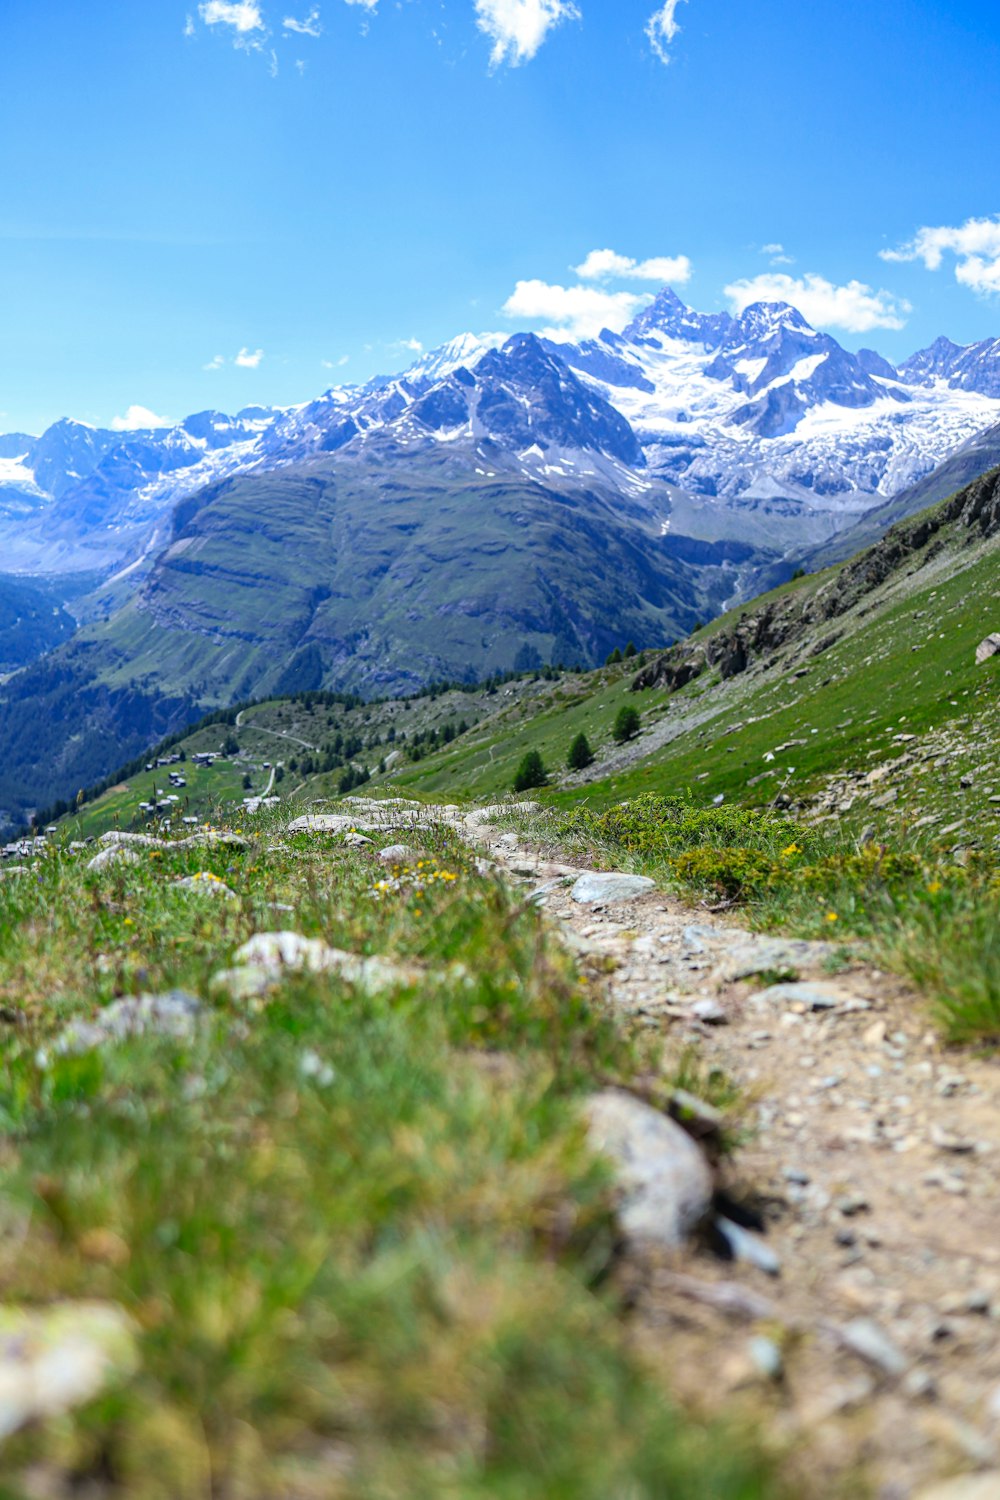 a trail winds through a valley with mountains in the background